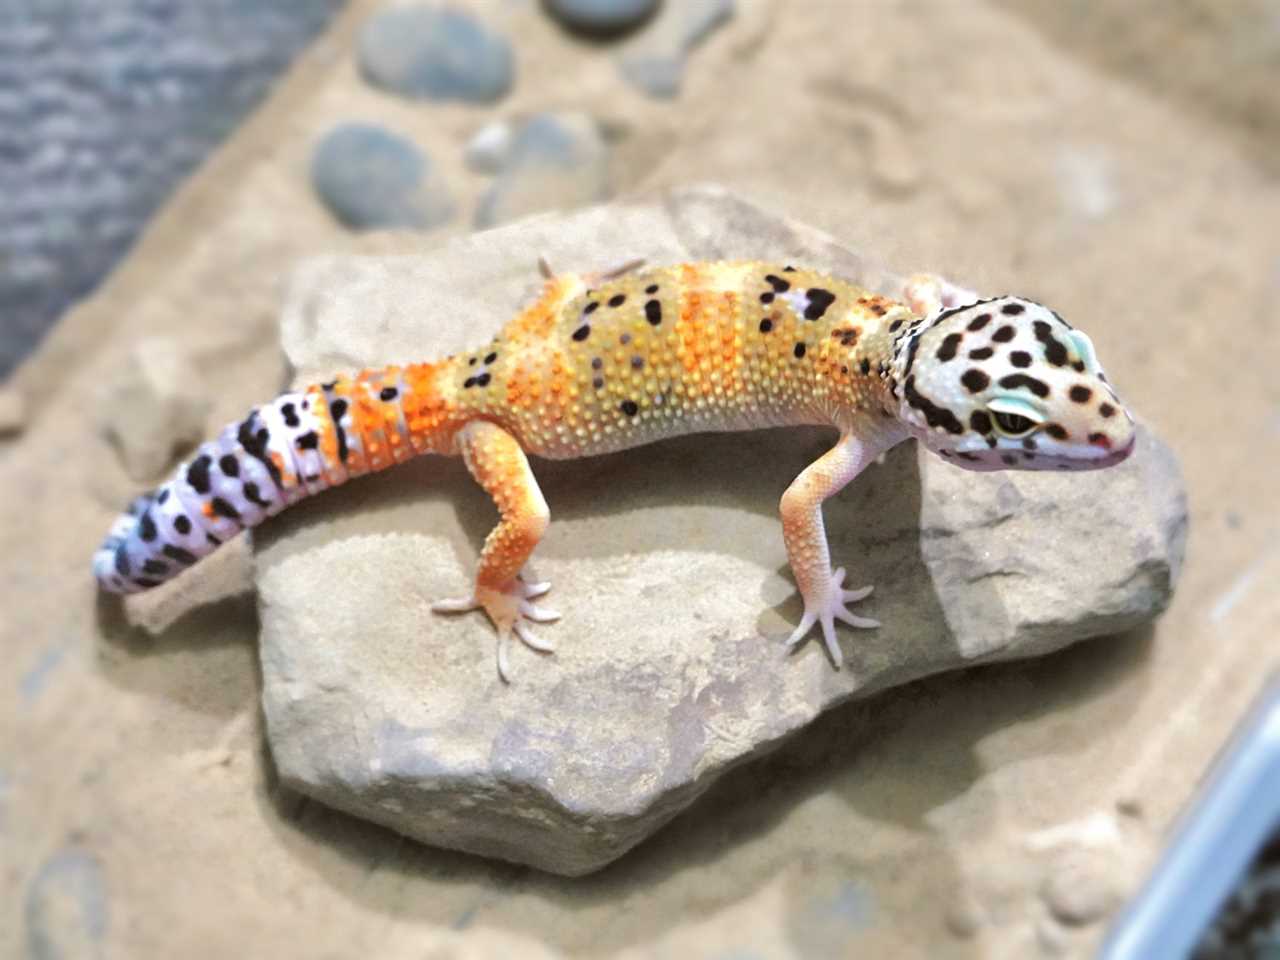 The Colors and Patterns of the Lavender Leopard Gecko